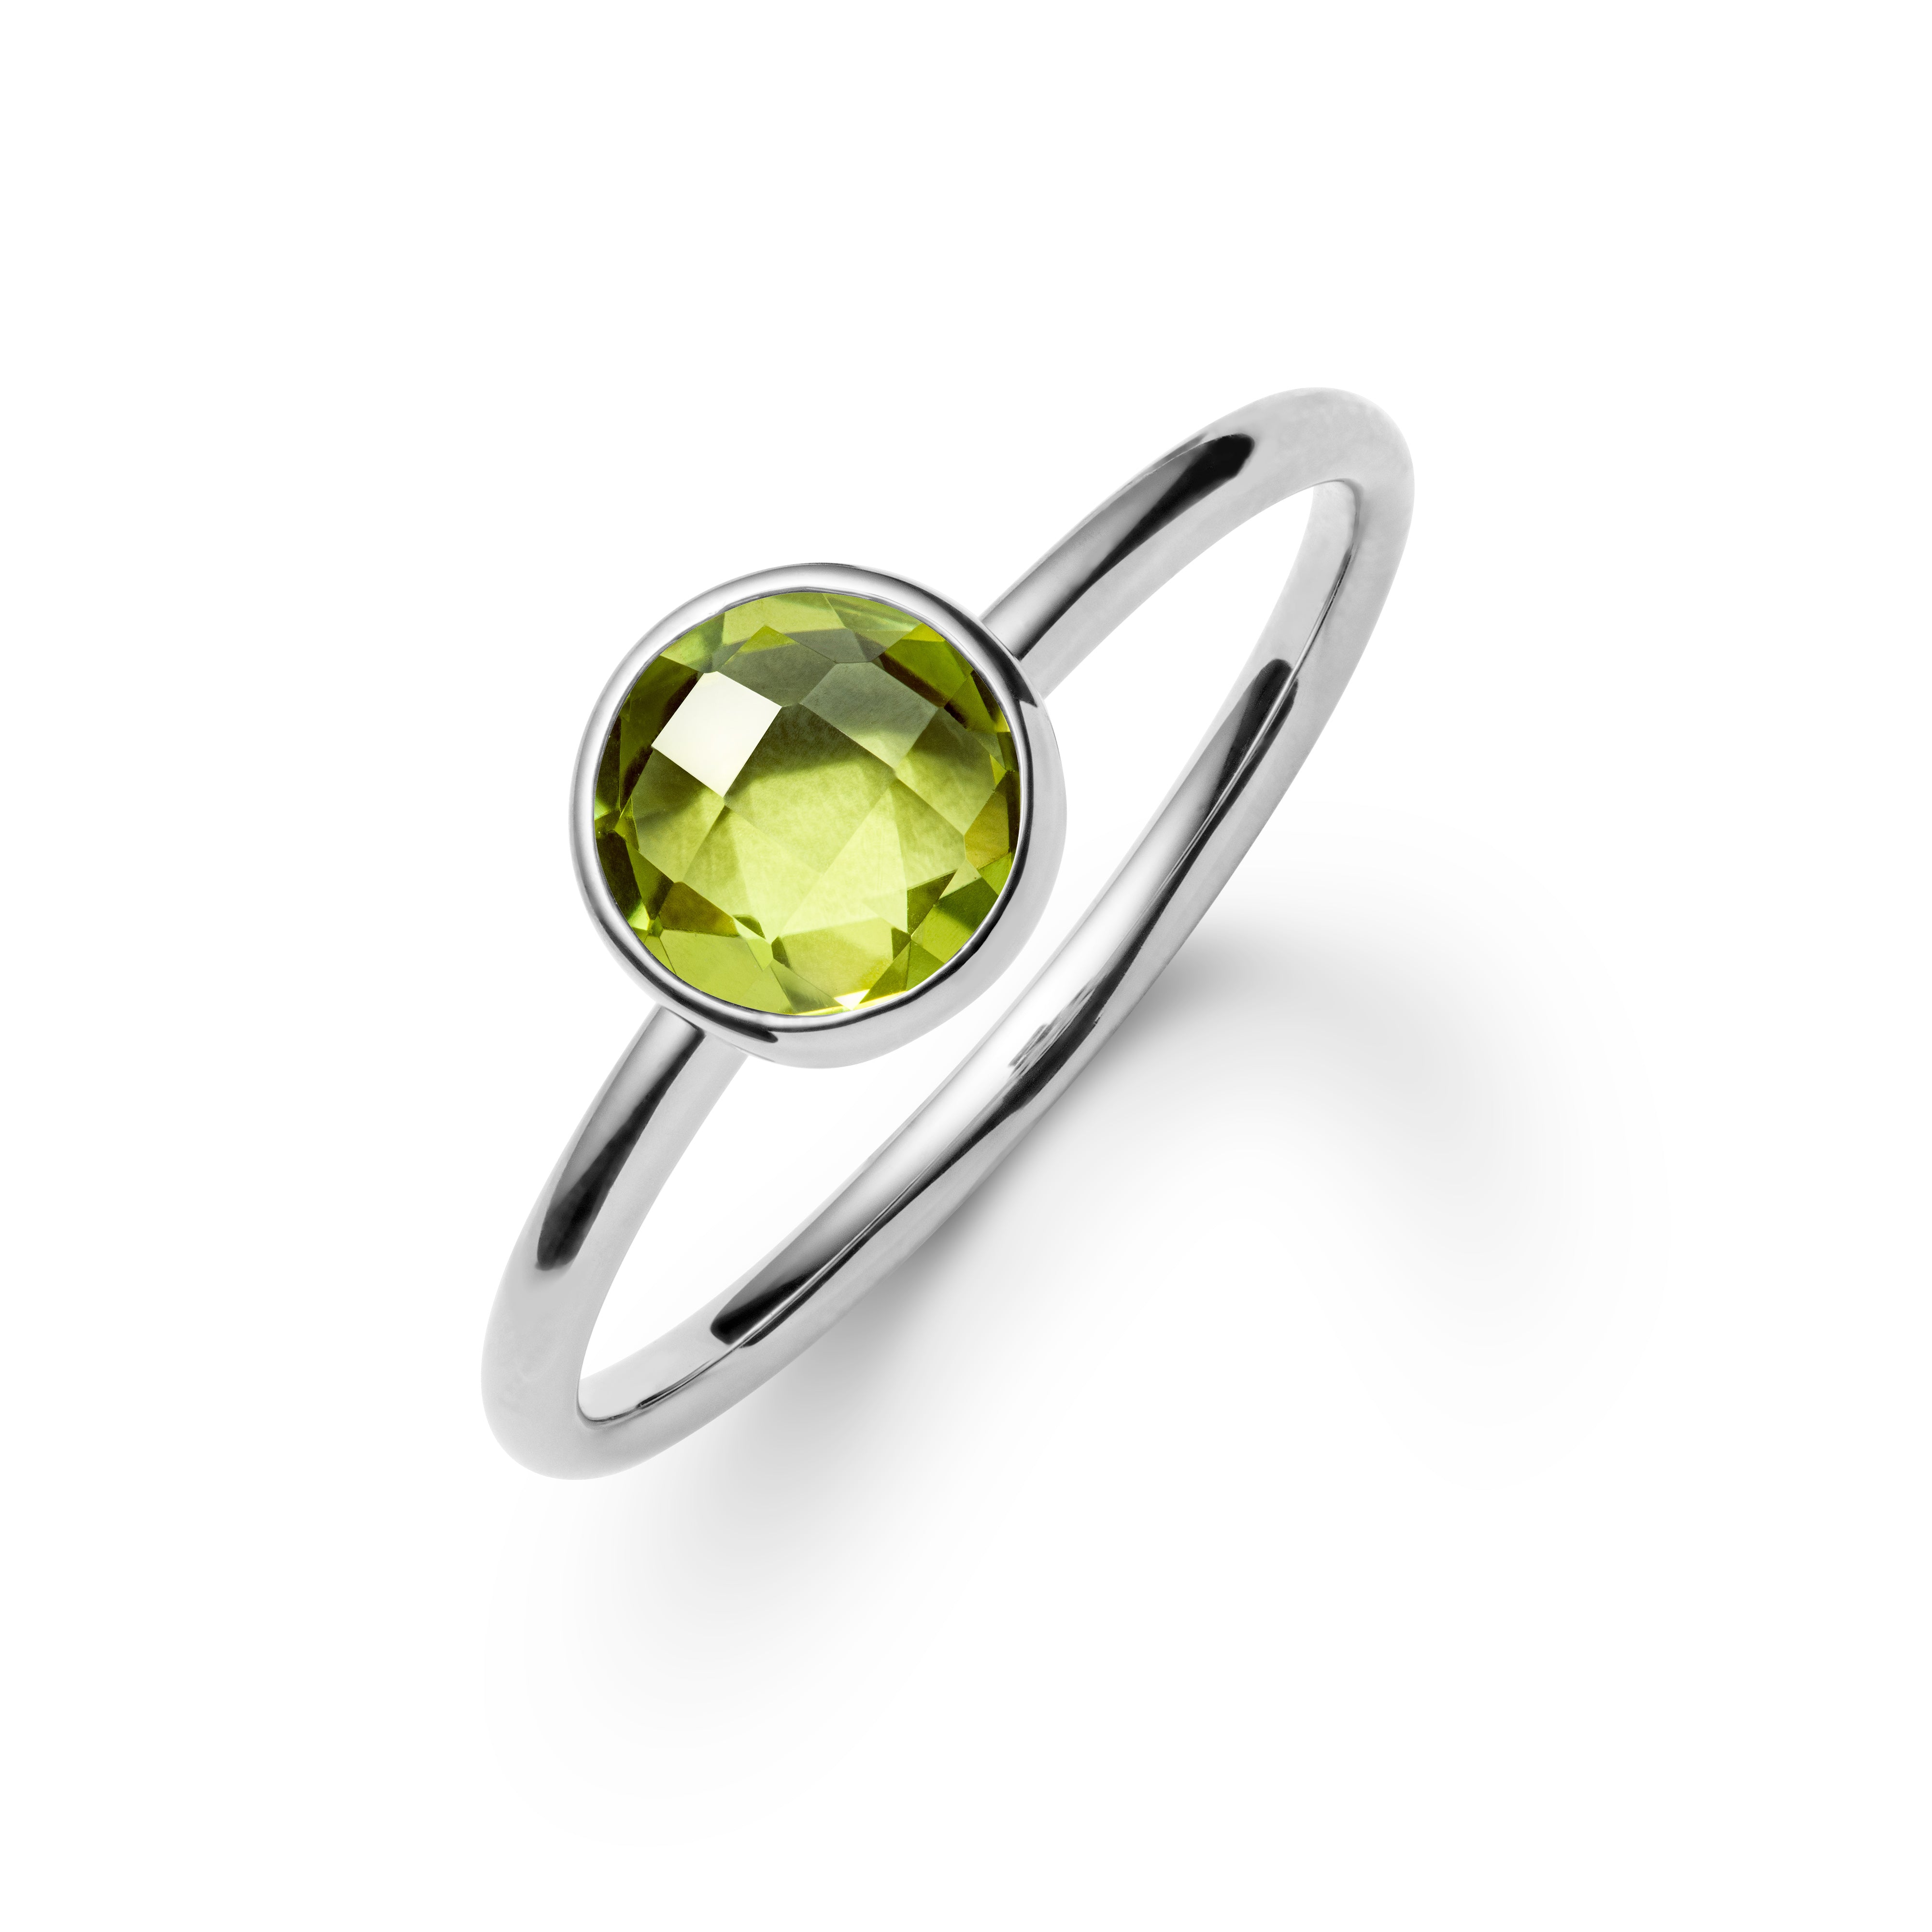 Grand Peridot Gold Ring 14k (August) in